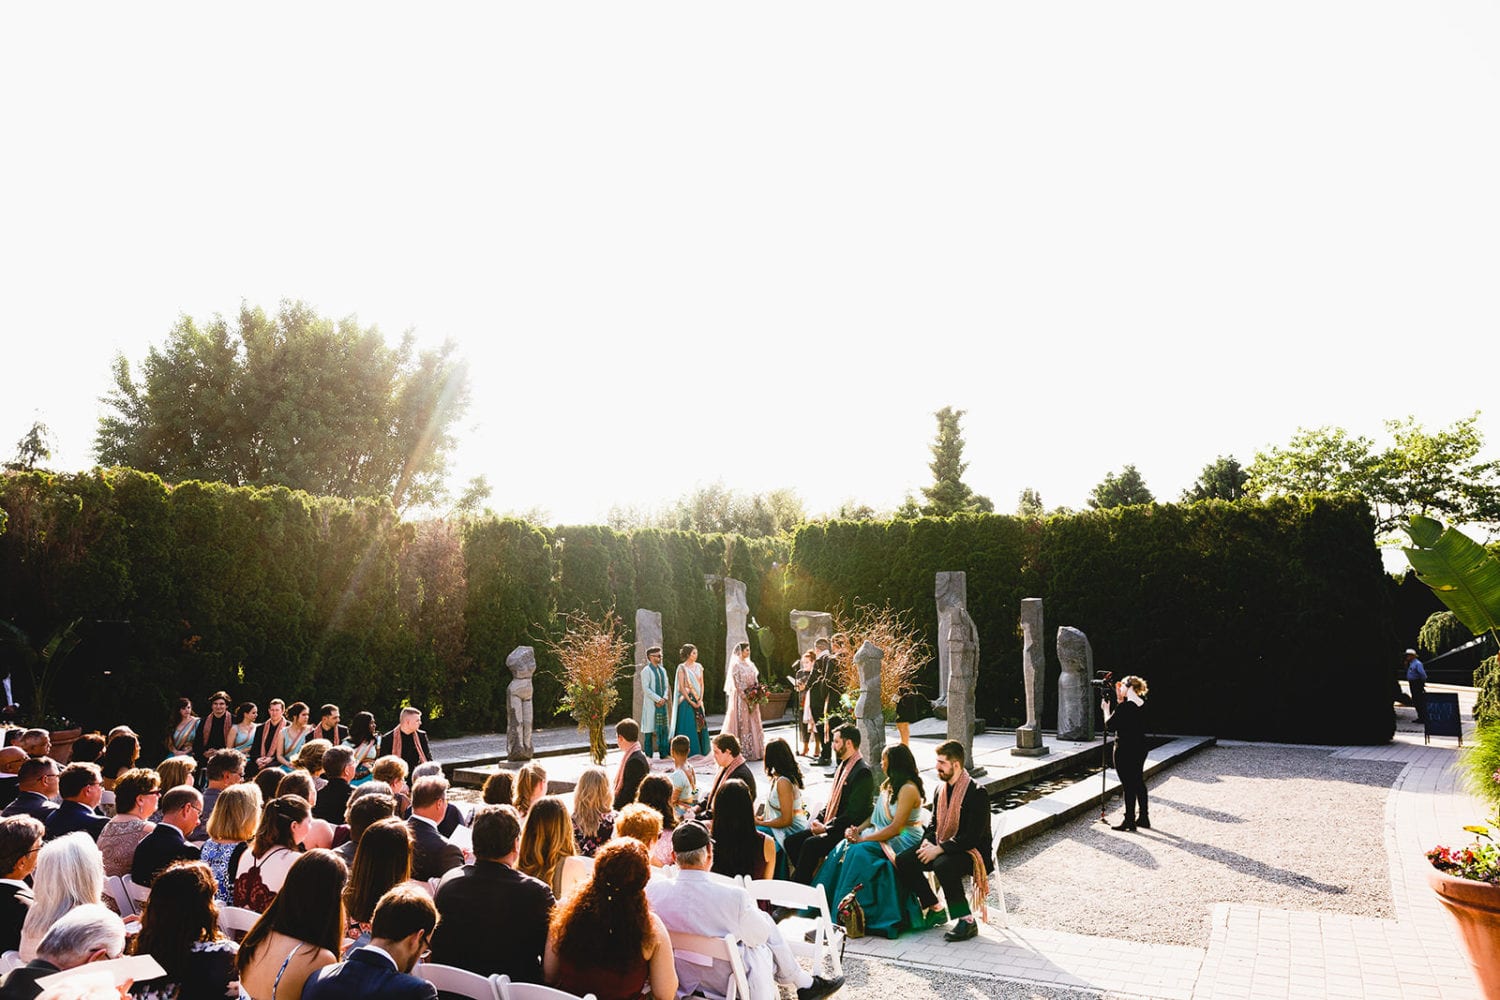 The sunset was beautiful at this wedding ceremony at the Grounds for Sculpture